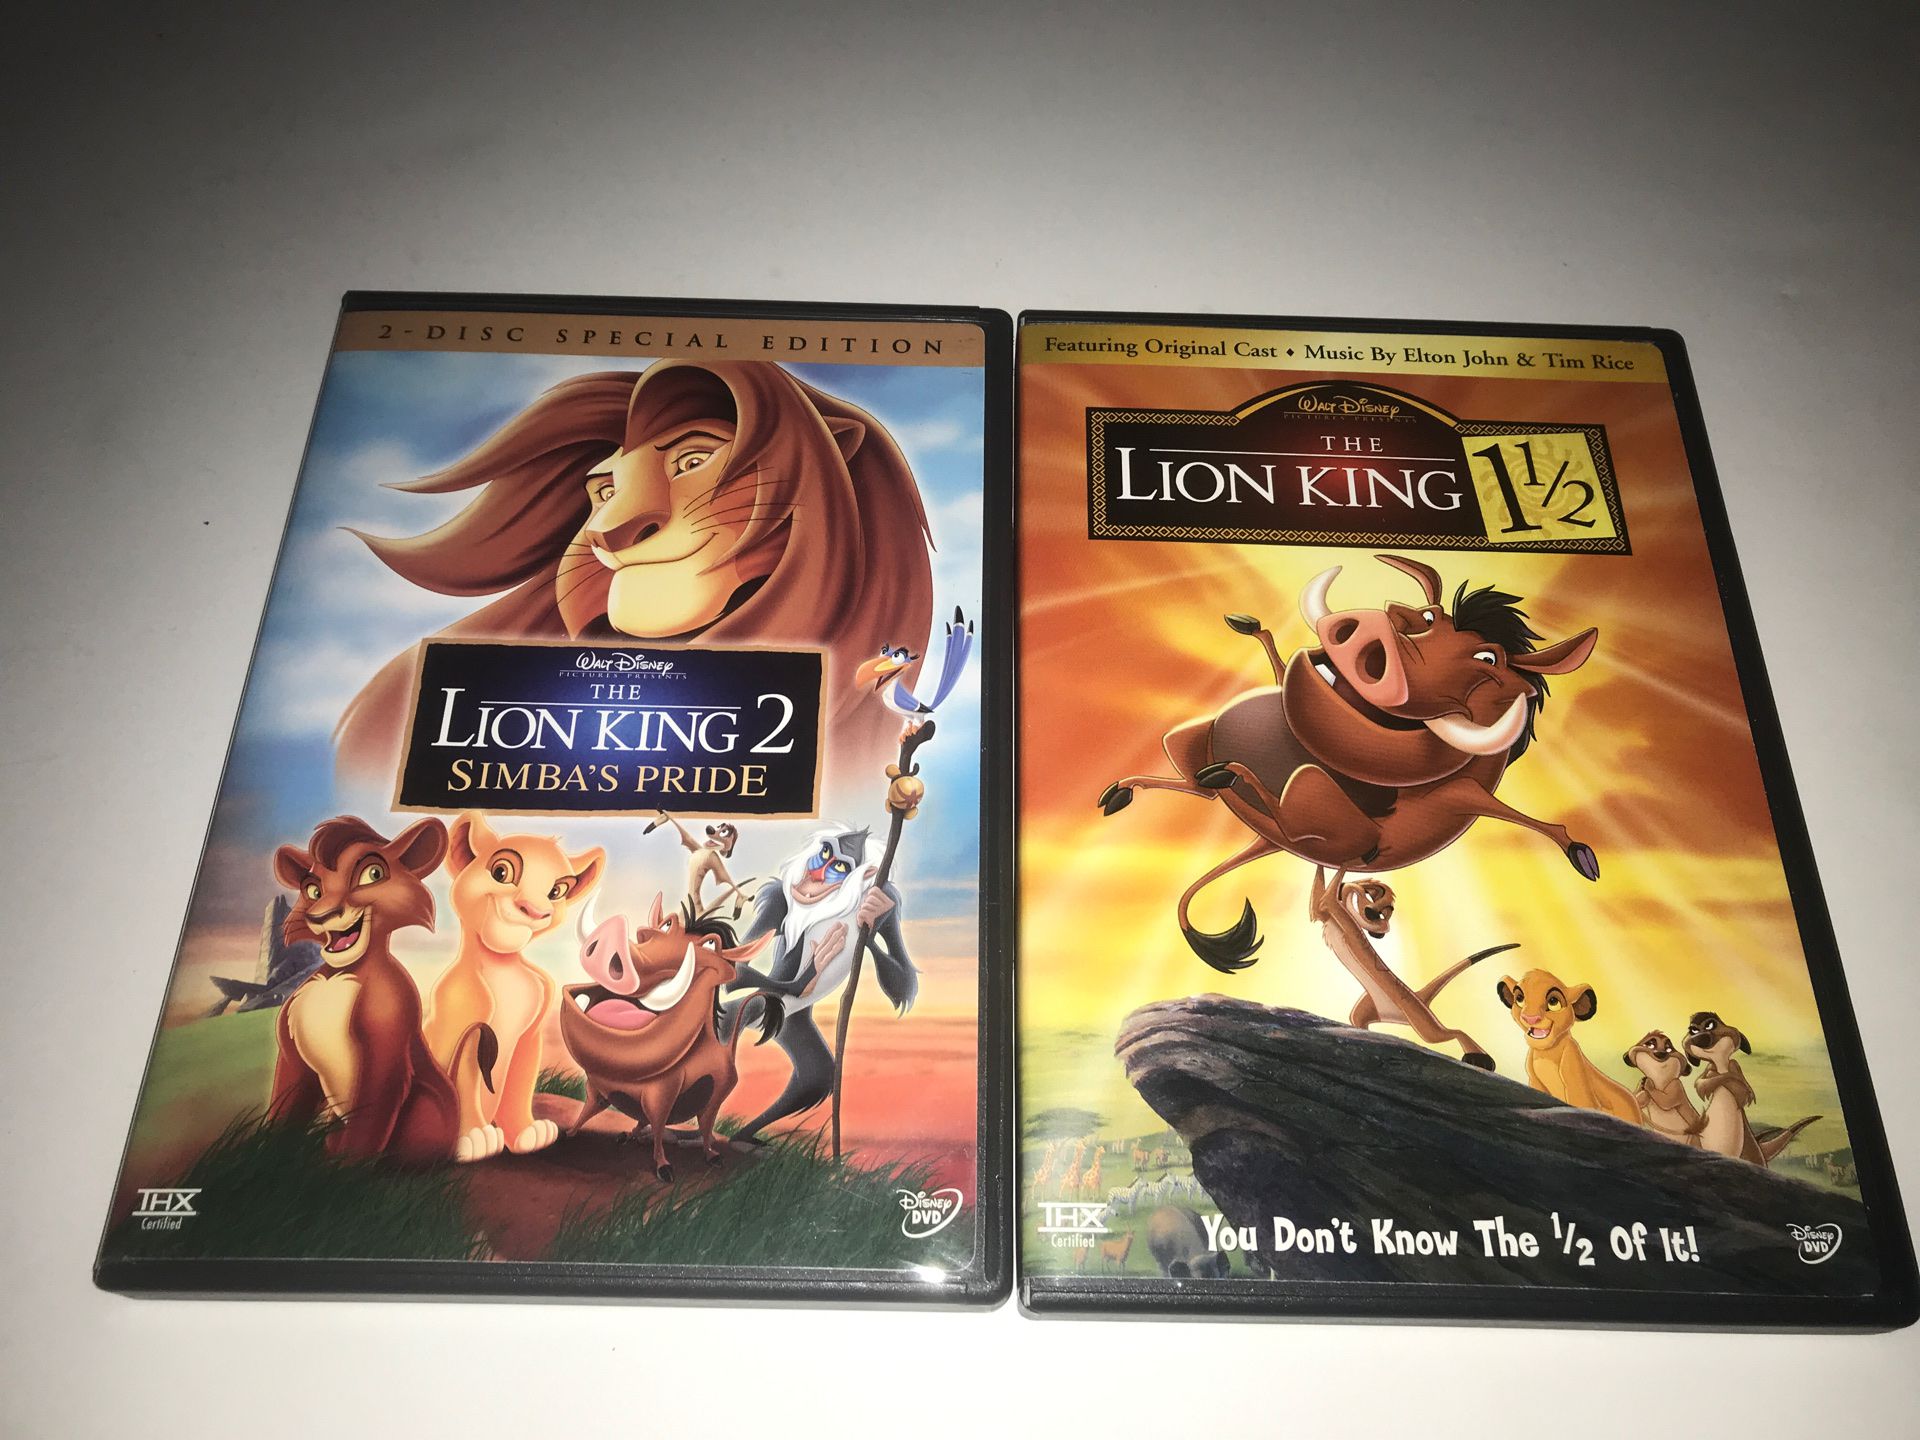 The Lion King 2& 1&1/2 DVDs